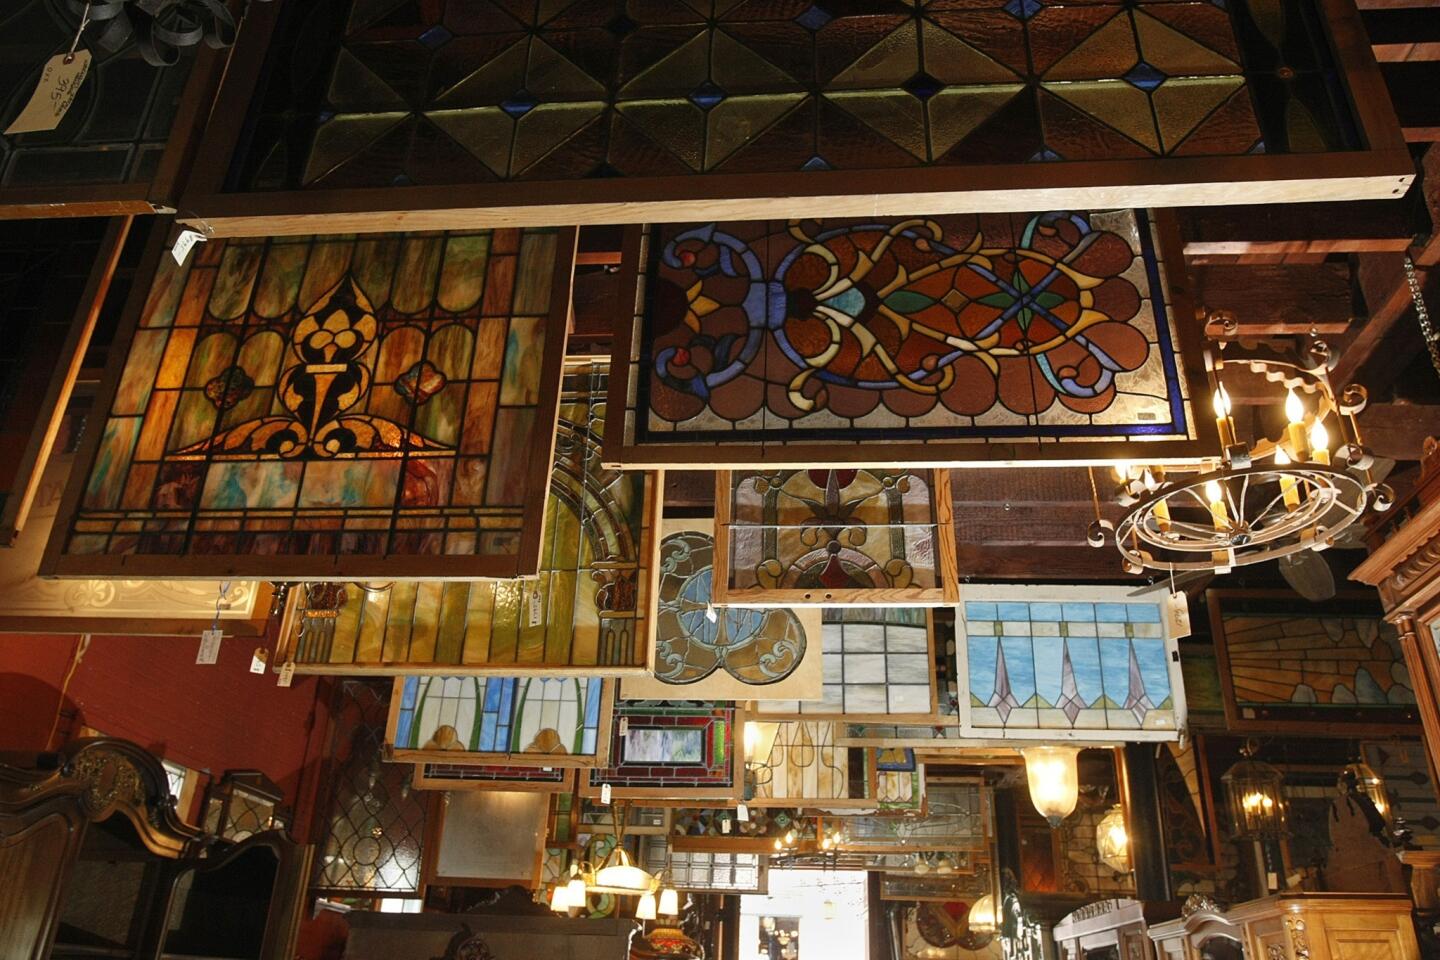 An impressive array of more than 300 stained glass windows hang in the back of the store George II.